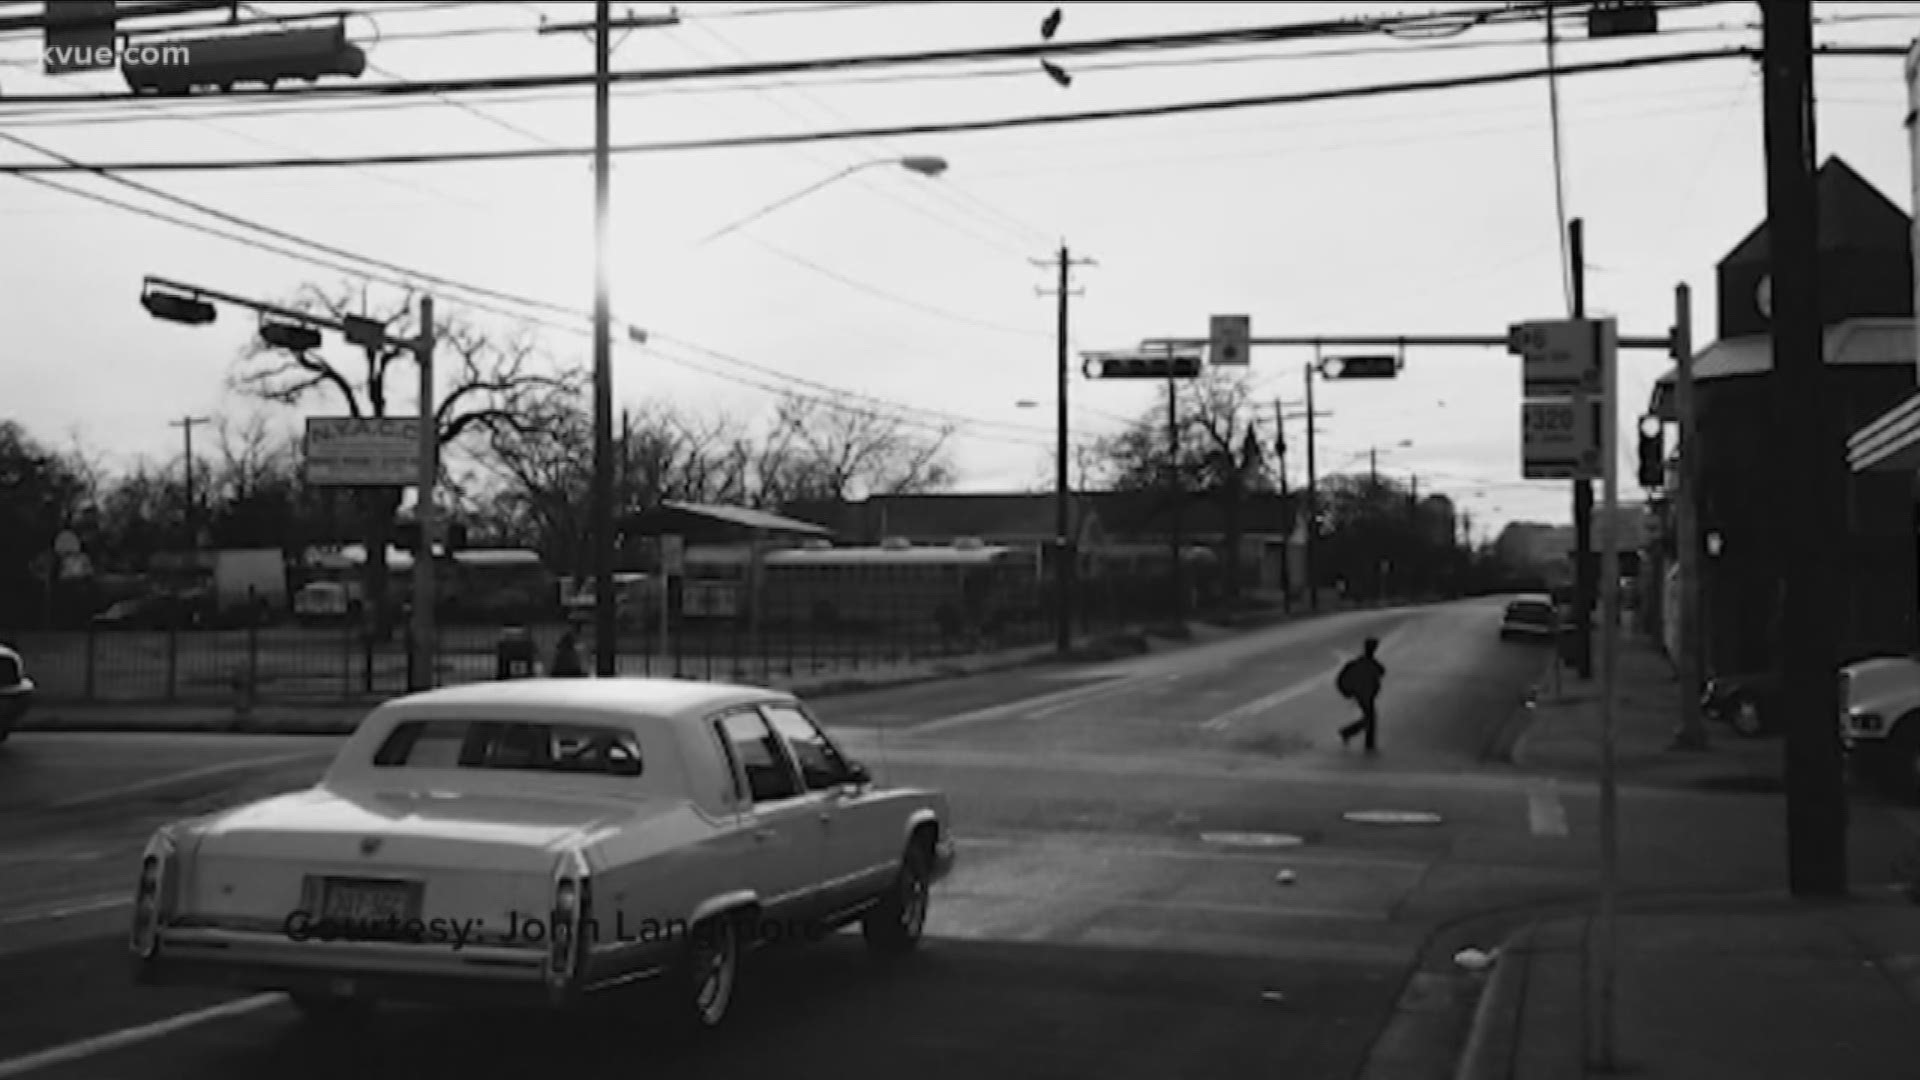 As the city constantly evolves, a local photographer won't let people forget the "old Austin." He's spent years capturing the soul of East Austin before its gone.